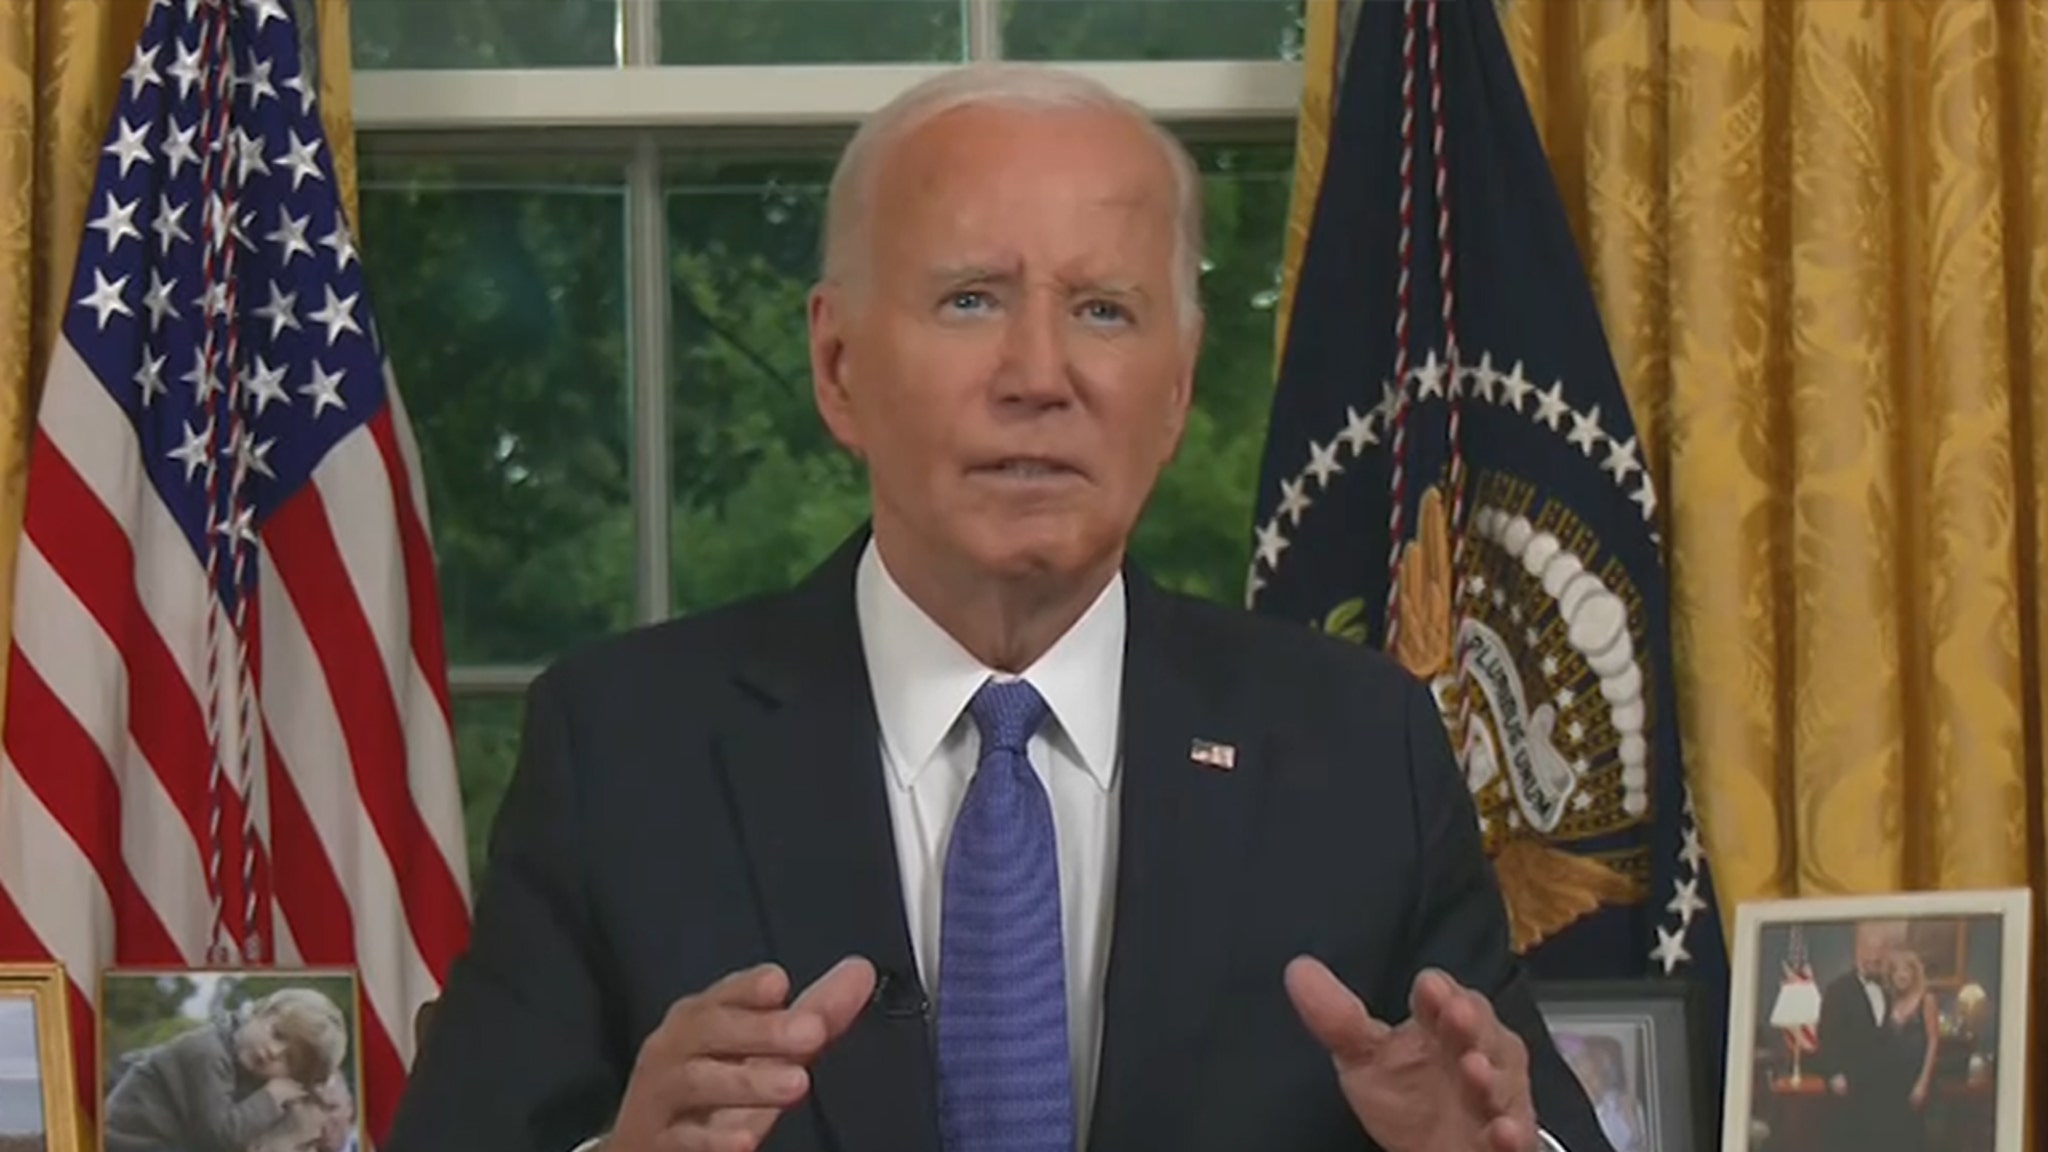 President Biden Addresses Nation After Dropping Out, Time For New Generation